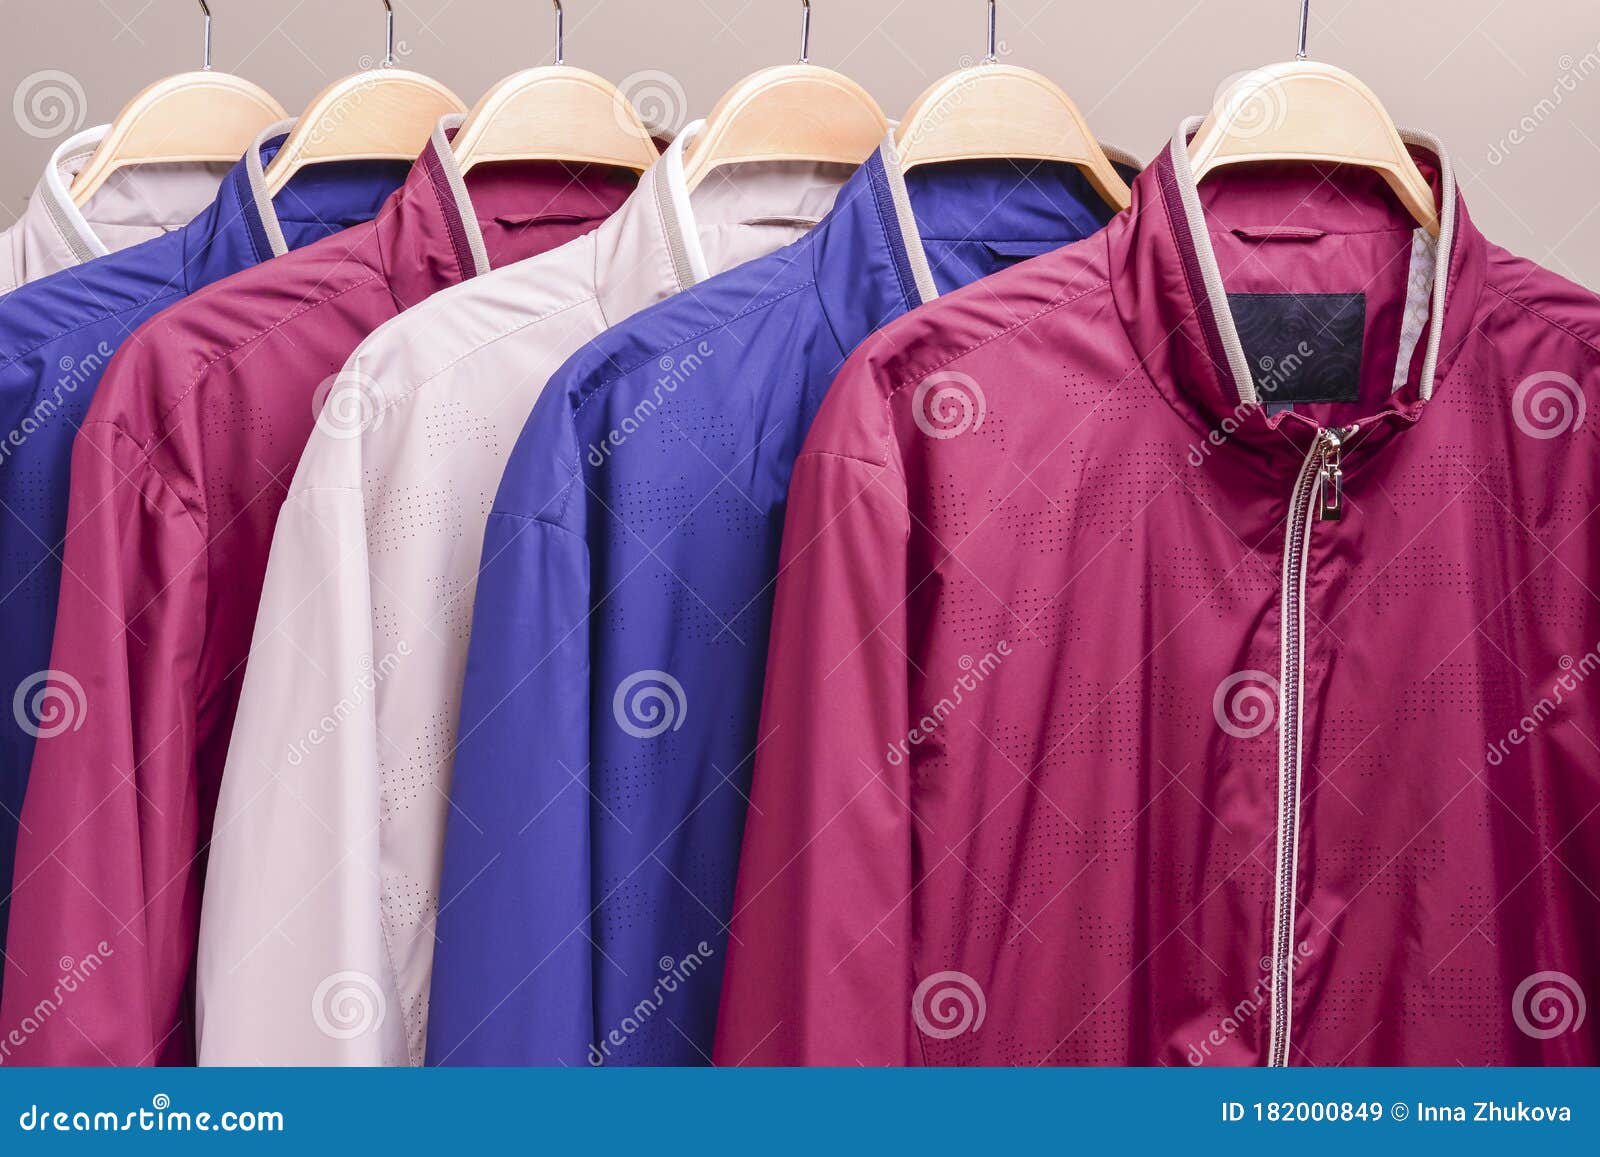 Row of Many Different Colorful Hoodie Jackets, Sport Jackets for Men ...